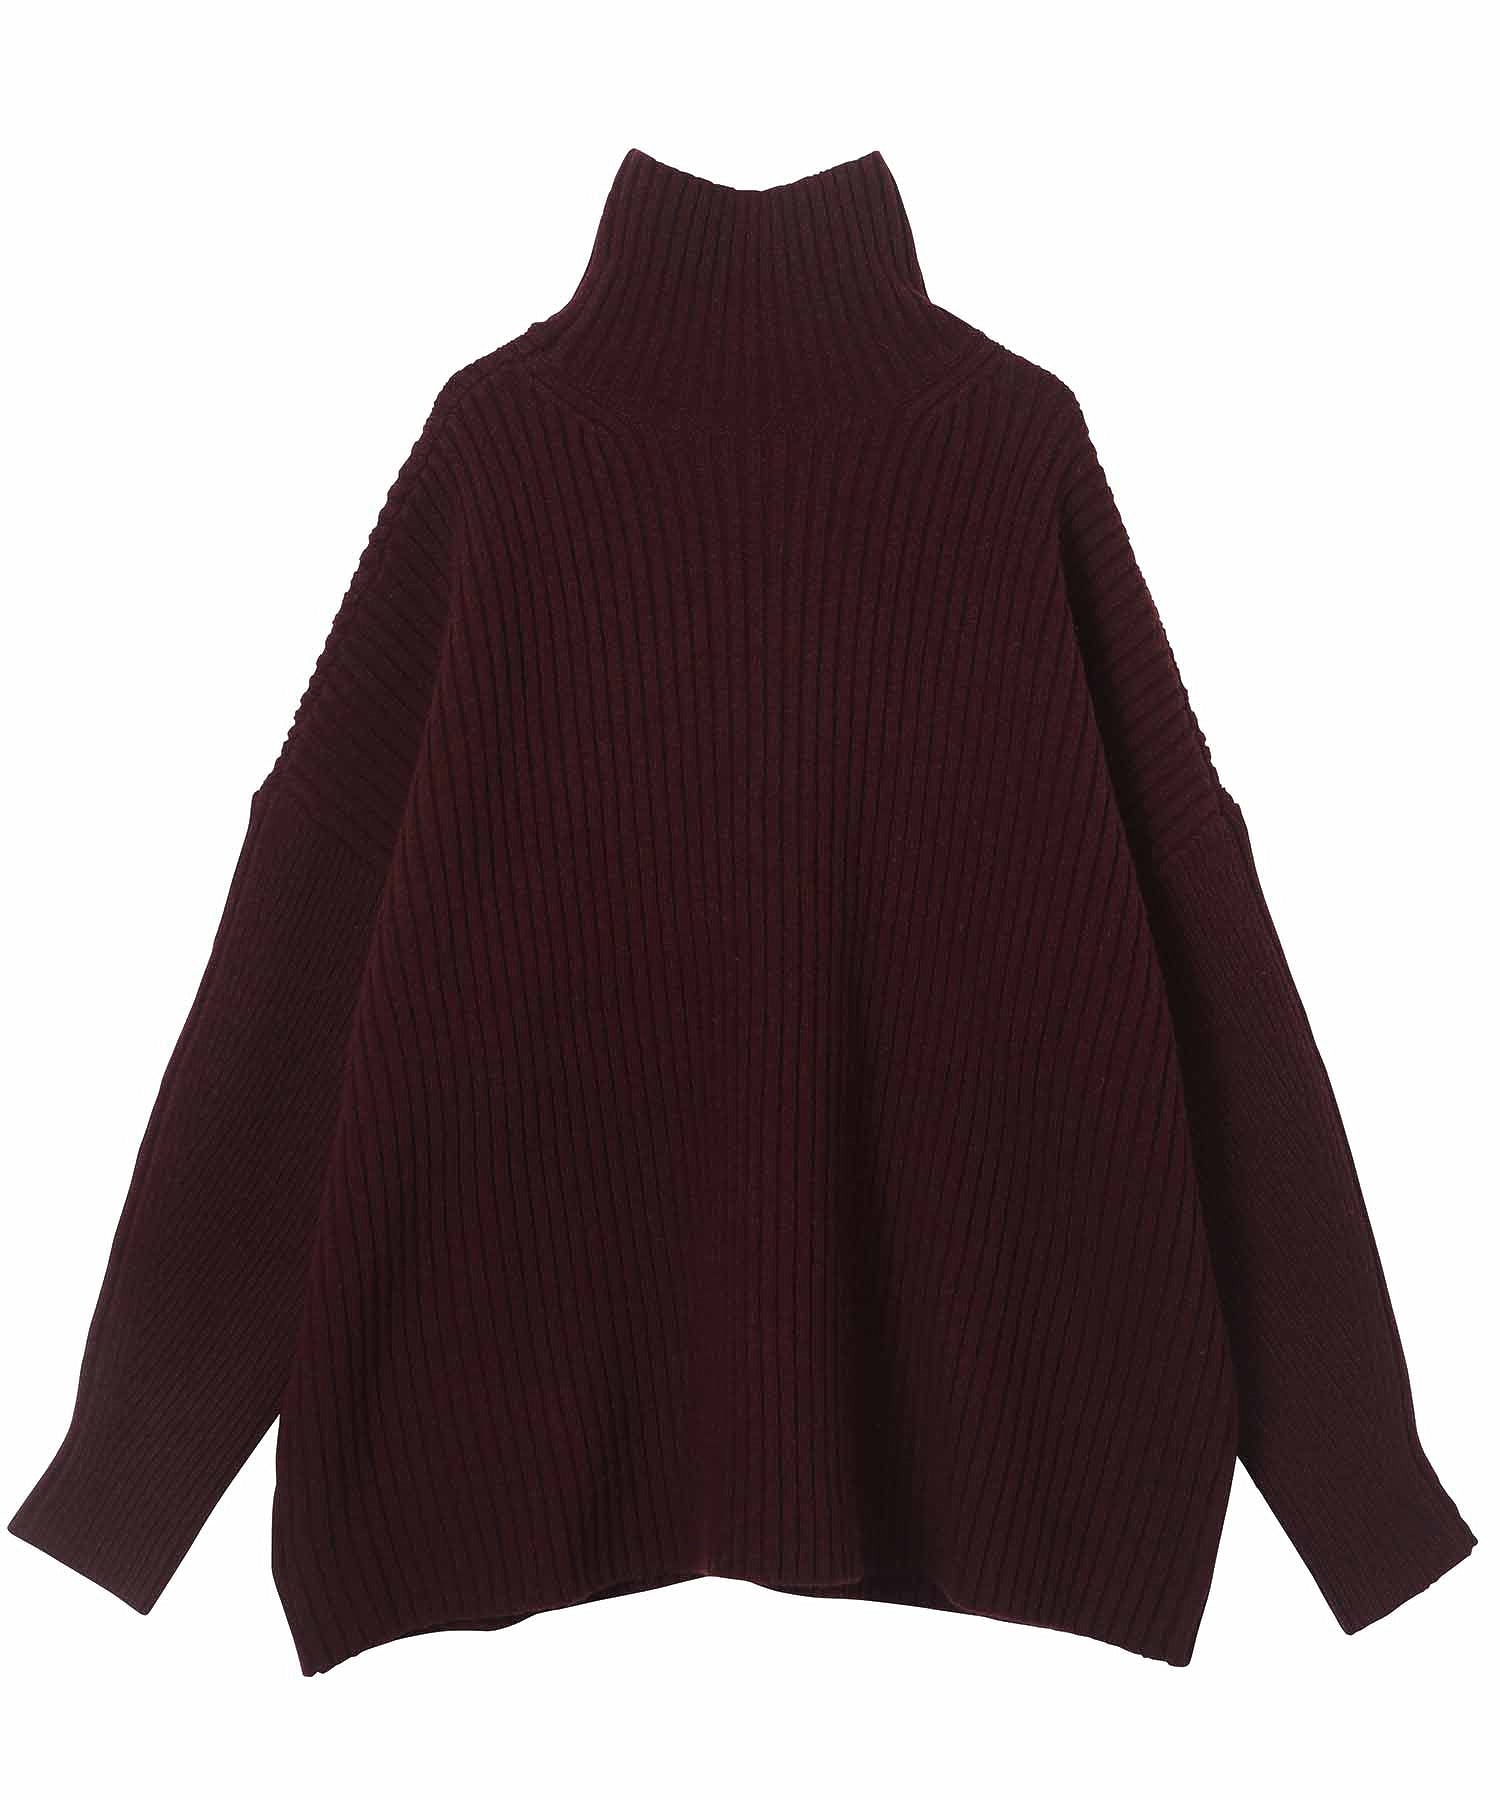 CLANE/クラネ/ DOUBLE FACE CENTER SLIT RIB KNIT TOPS 13106-2332